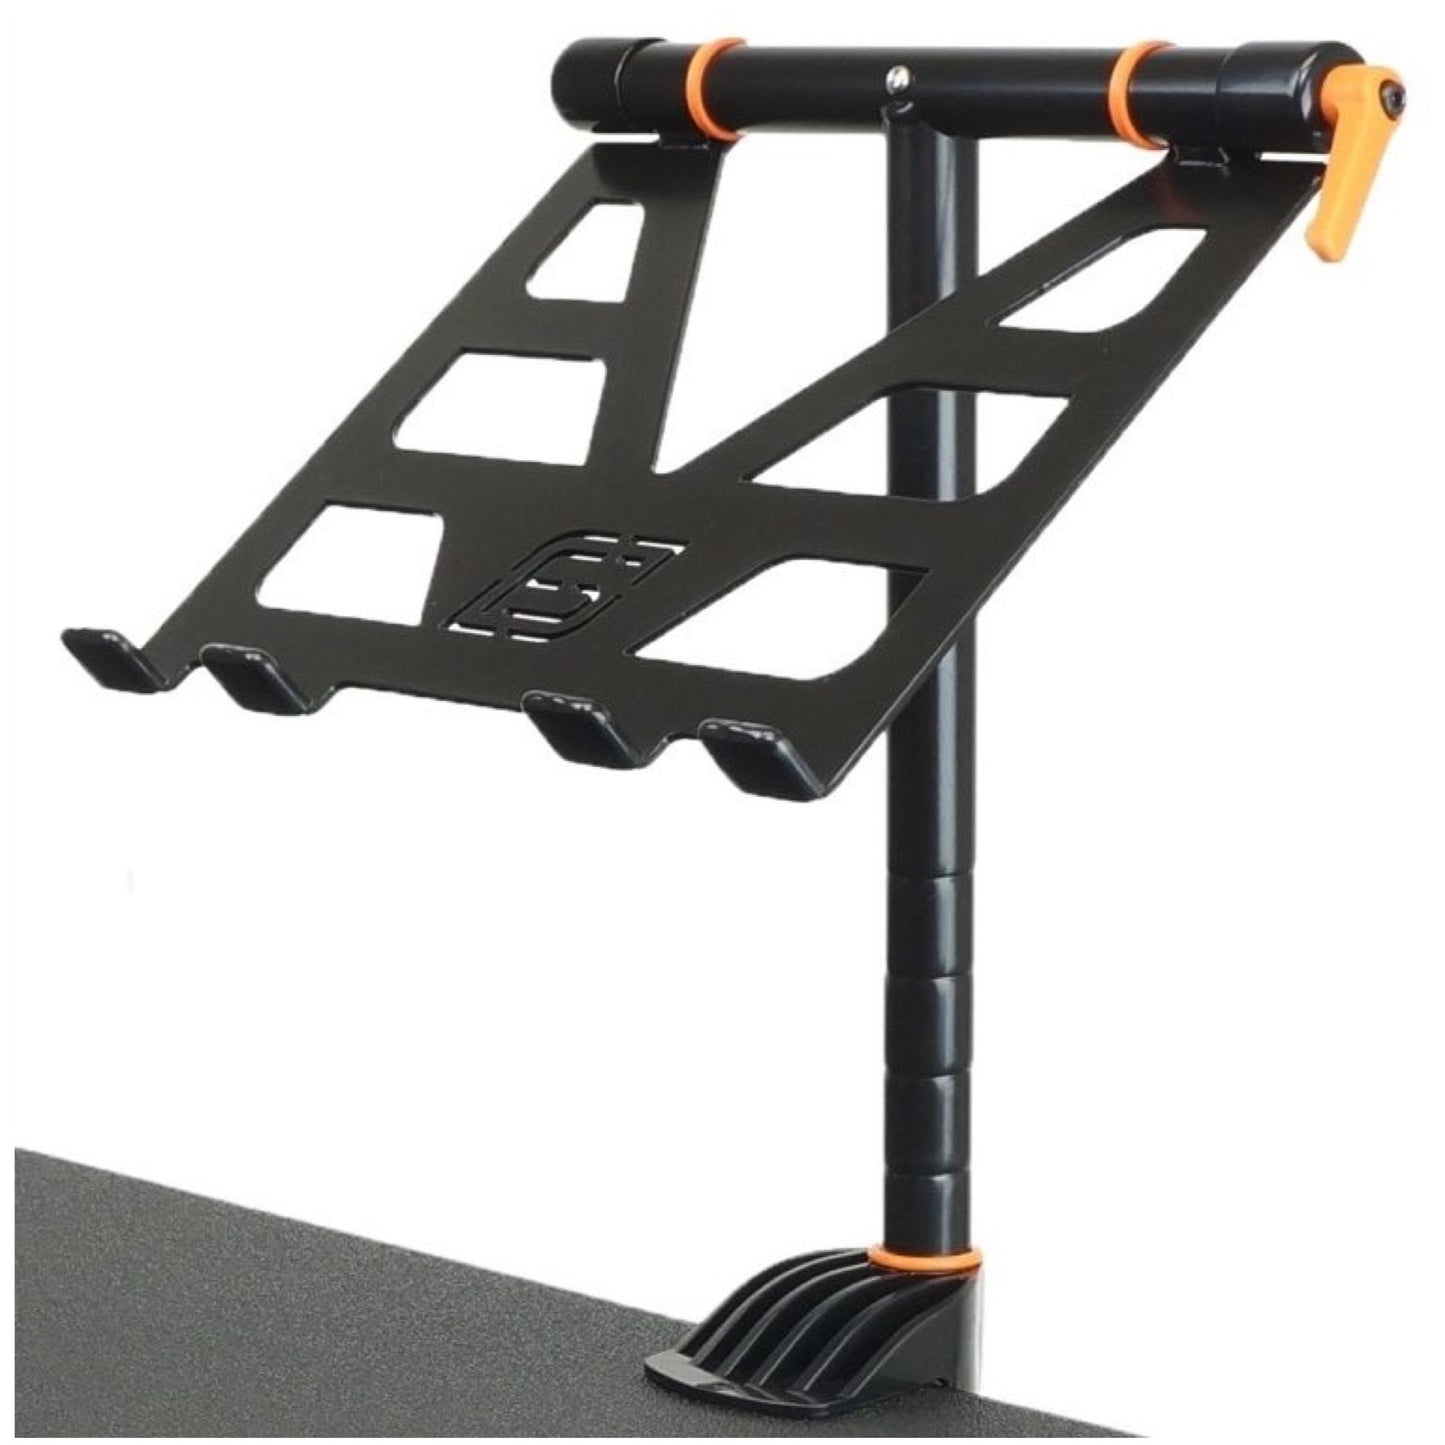 Fastset Fast-Attach Adjustable Laptop Stand, 14 Inch